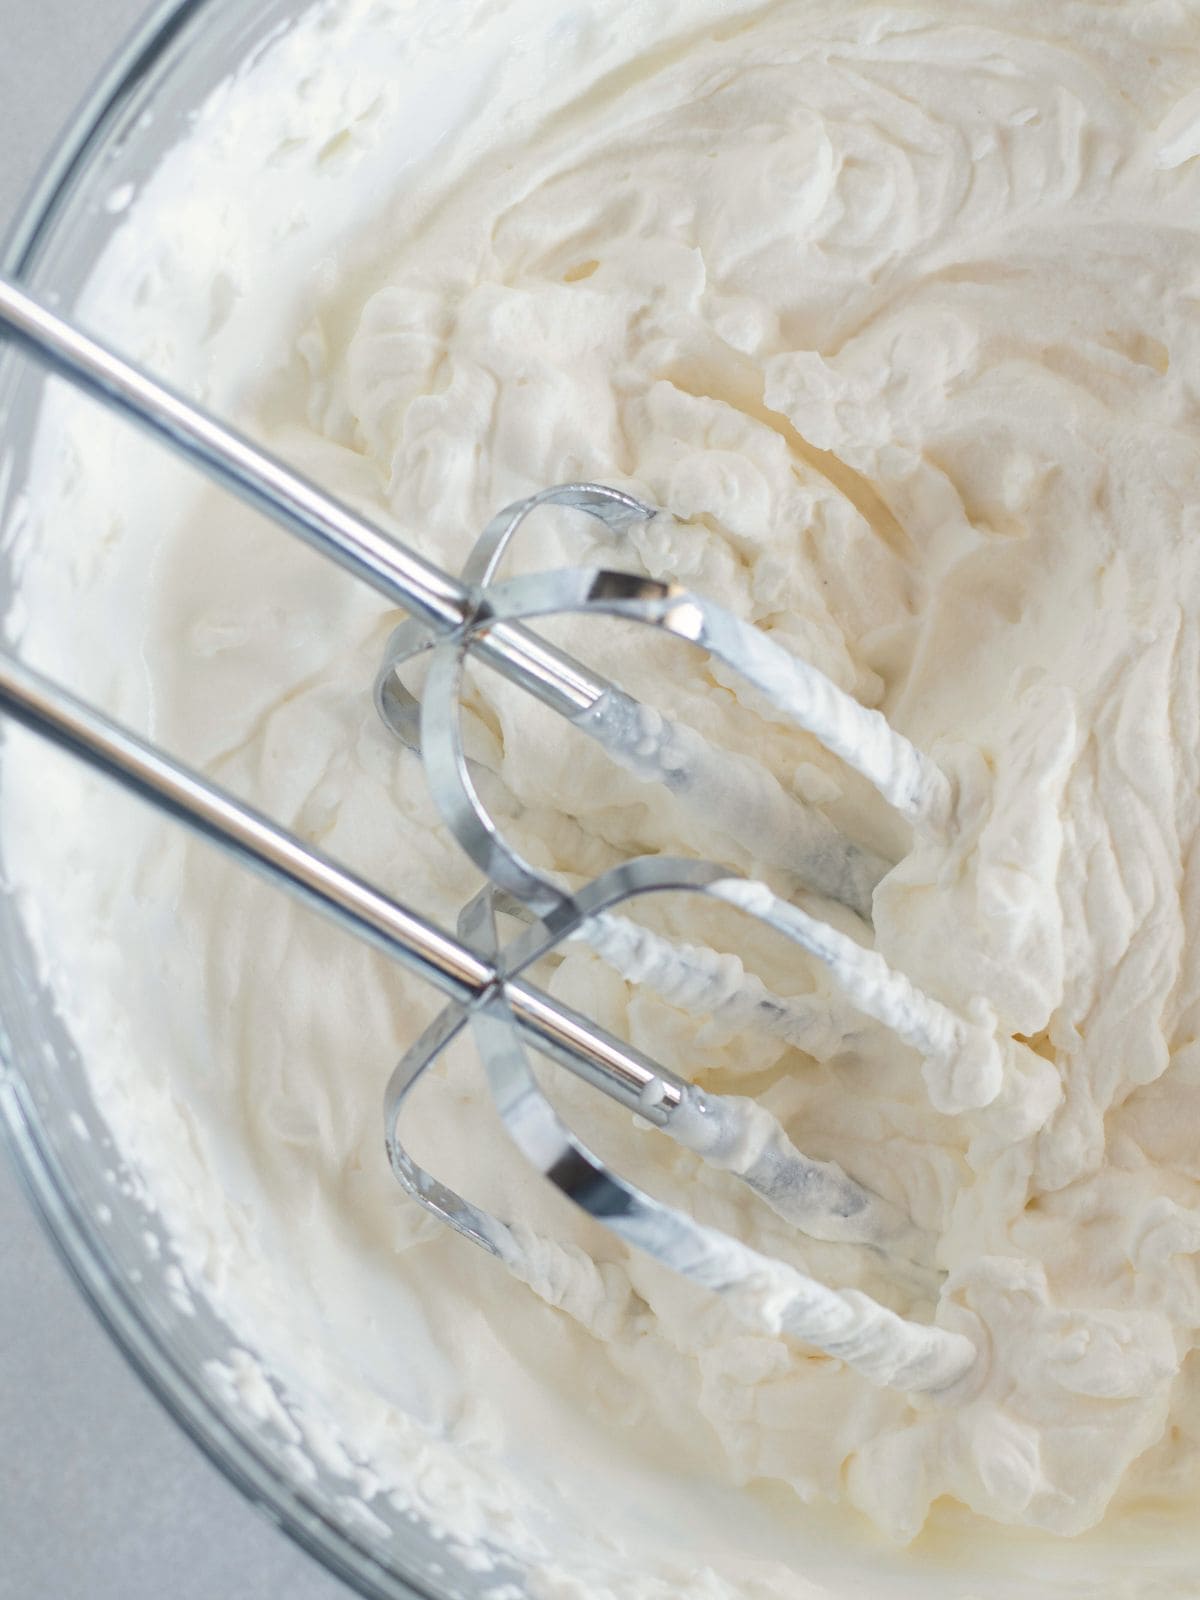 beaten whipped cream in a bowl with beaters.